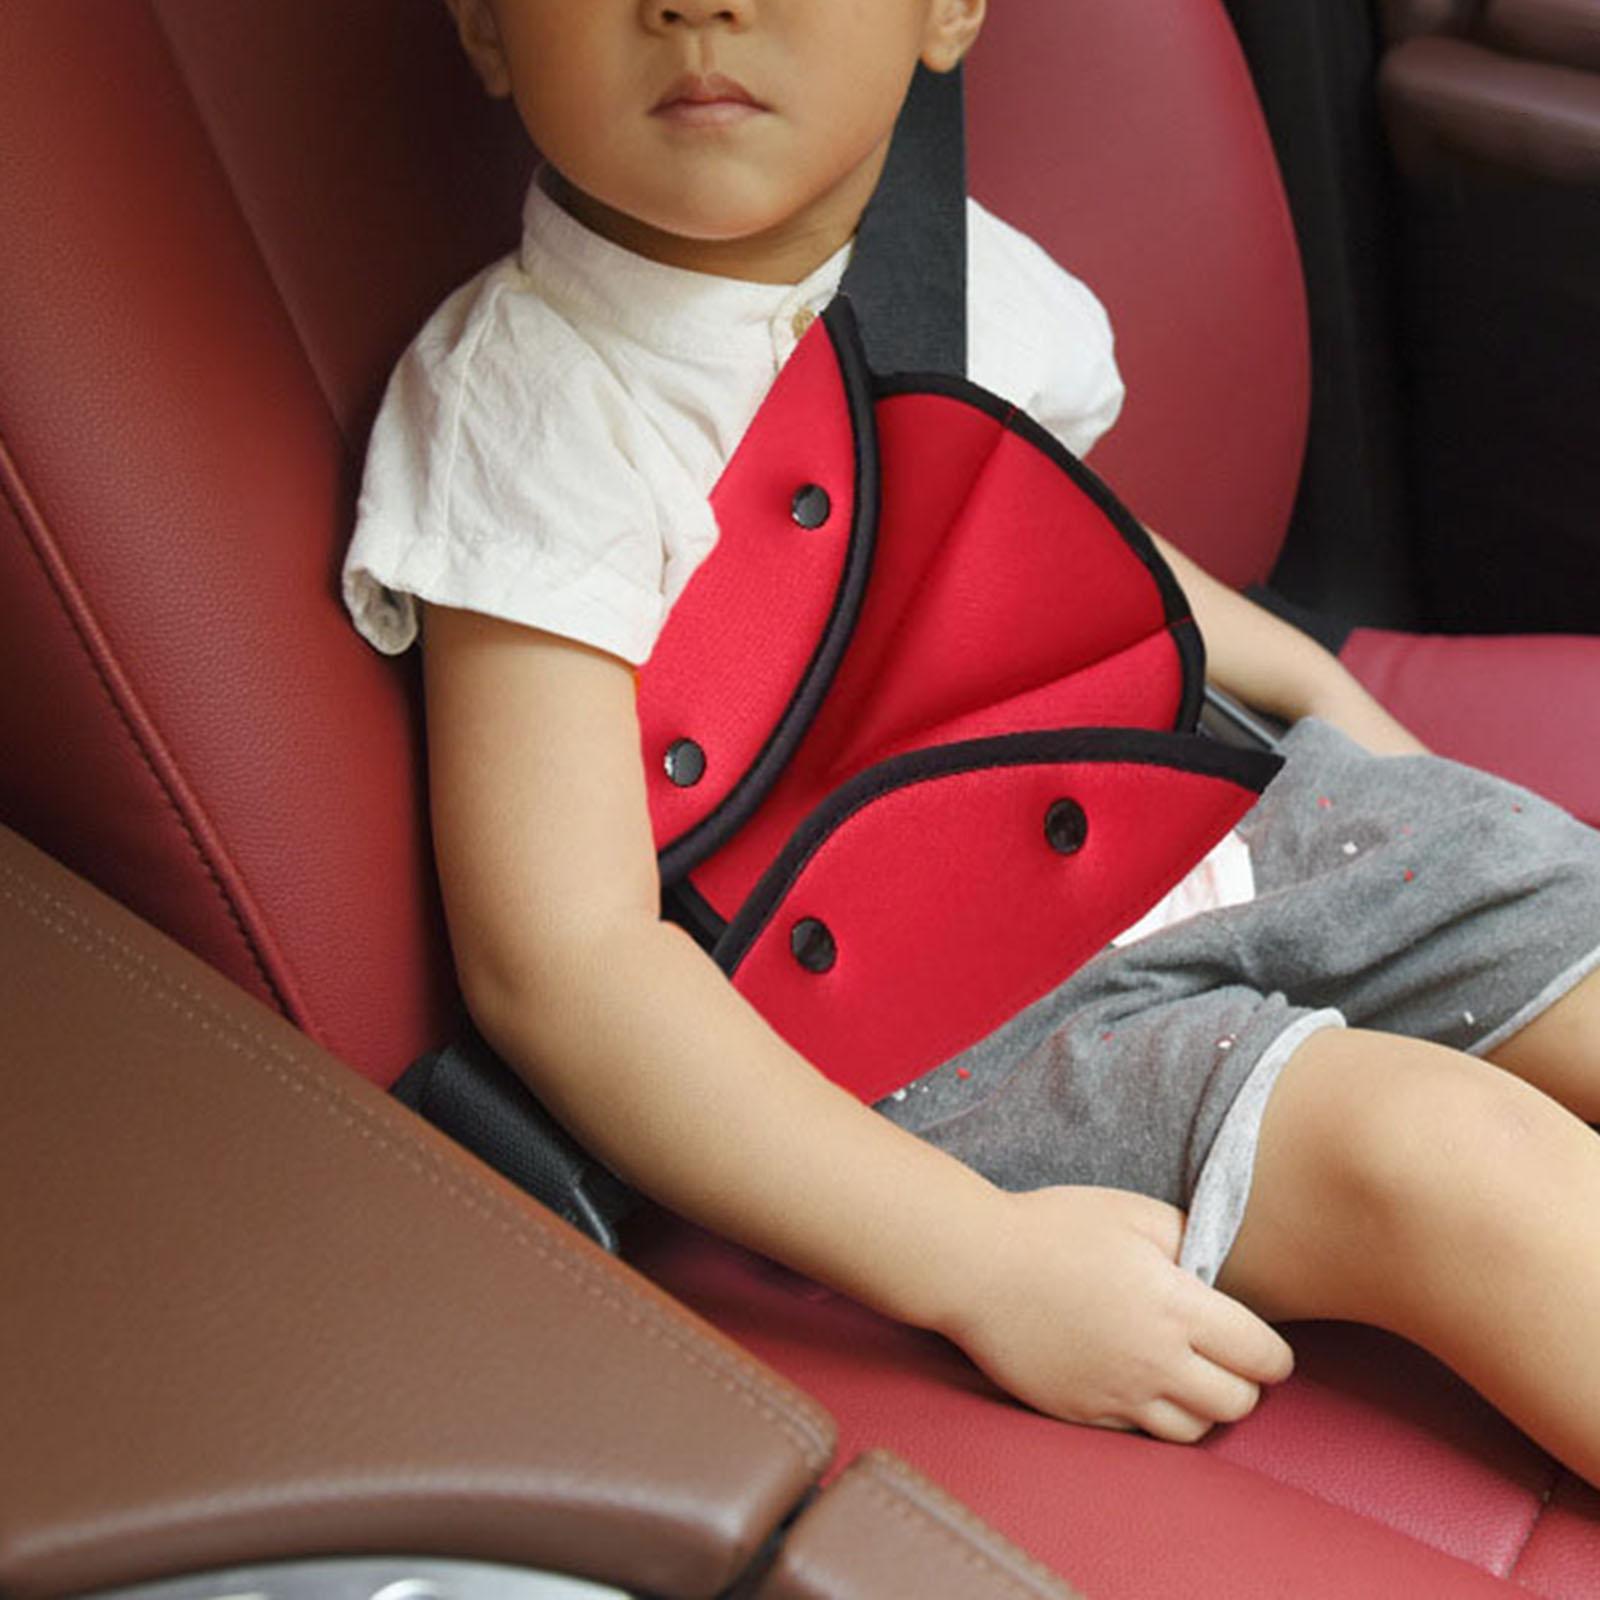 Car Seat Belt Adjuster for Kids Triangle Protector Pad Seat Belt Strap Cover Red